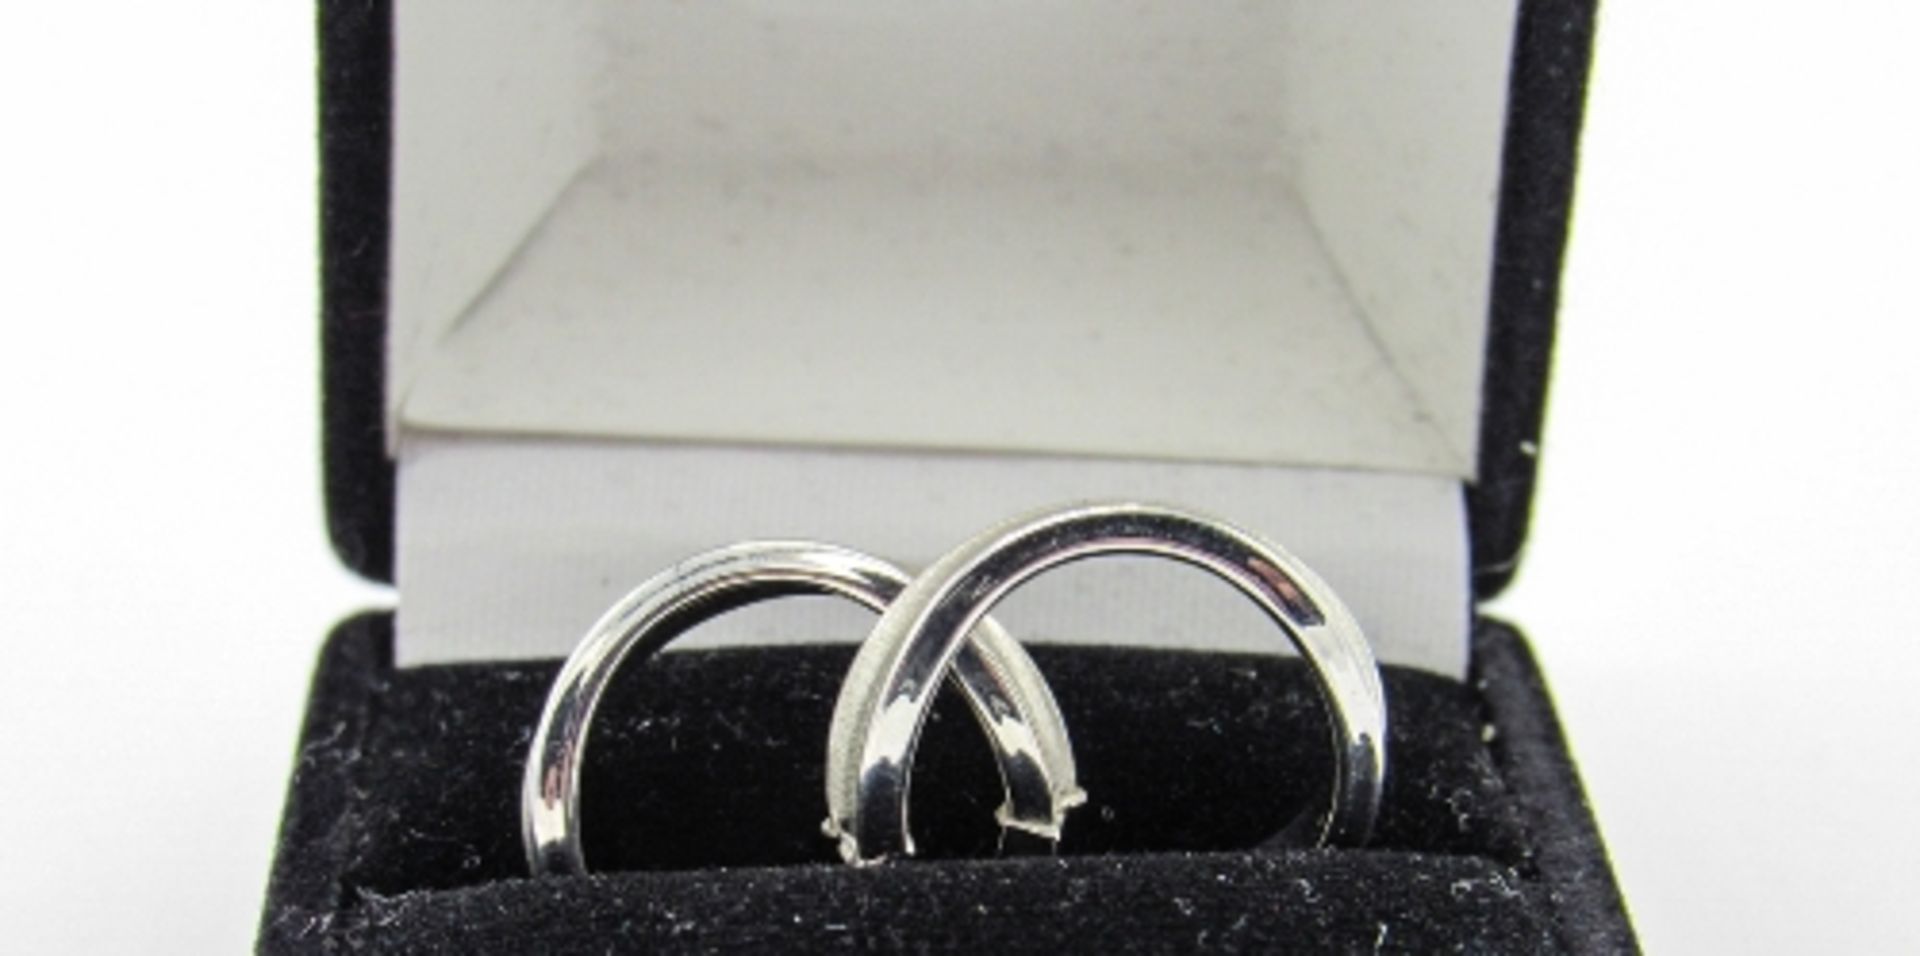 9ct white gold hooped earrings, weight 1.5gms. Estimate £15-20 - Image 3 of 3